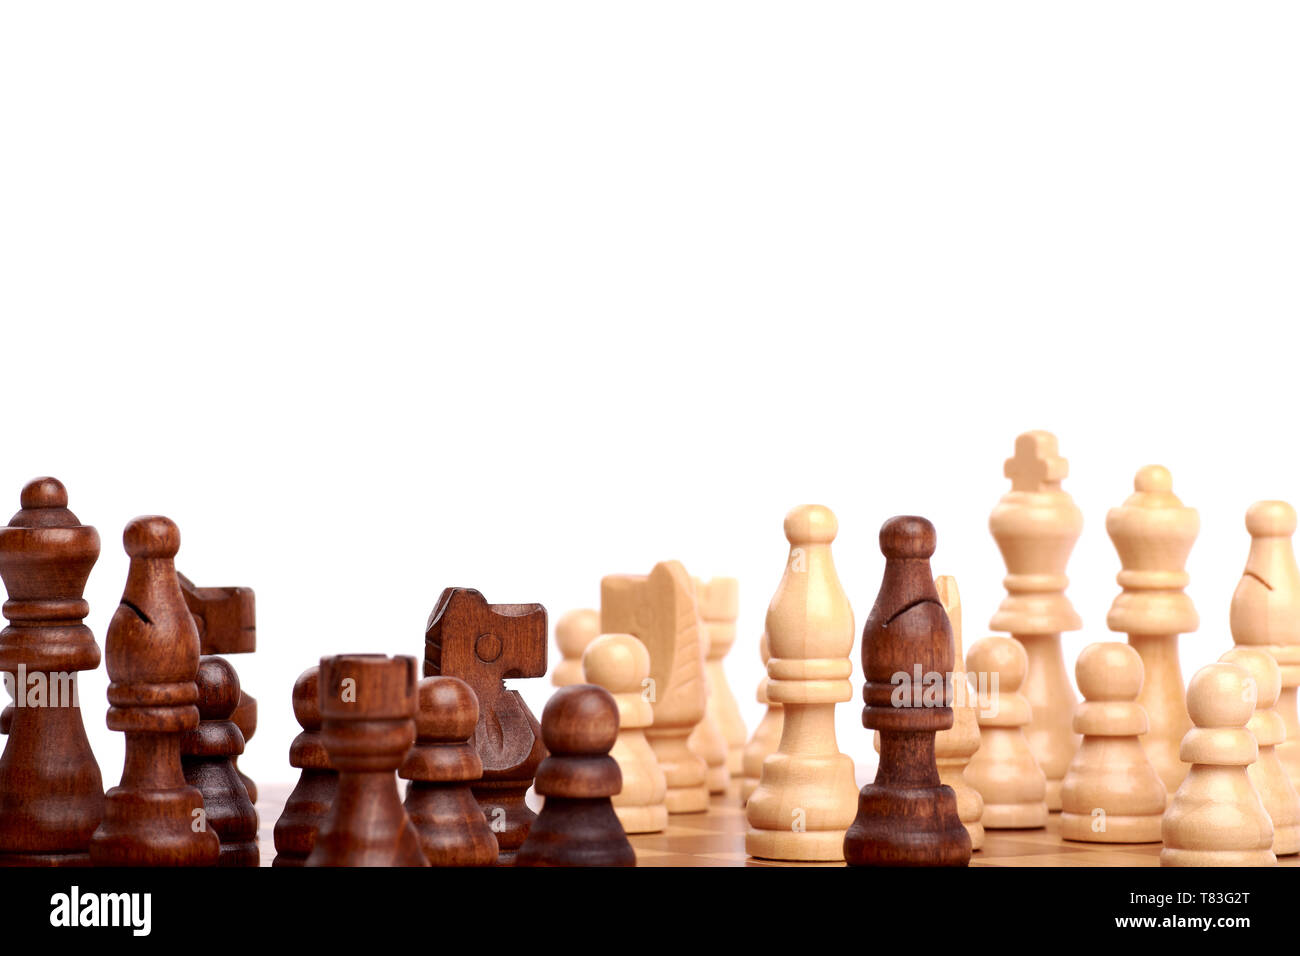 Close-up view of white and black chess pieces on a wooden chessboard in a scattered game. Isolated on white background Stock Photo